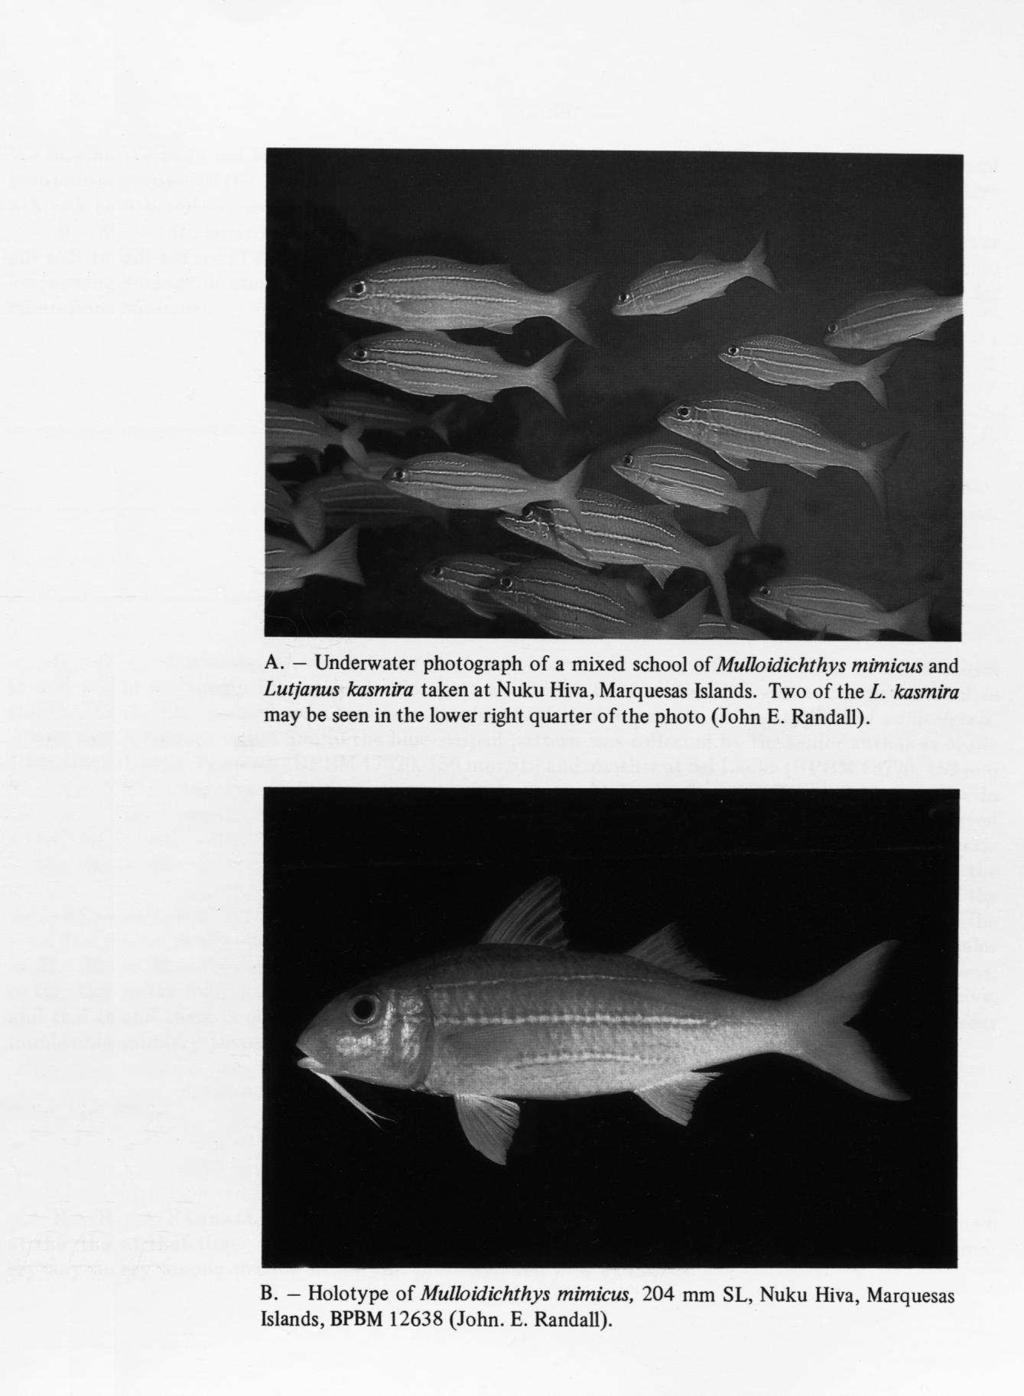 A. Underwater photograph of a mixed school of Mulloidichthys mimicus and Lutjanus kasmira taken at Nuku Hiva, Marquesas Islands. Two of the L.